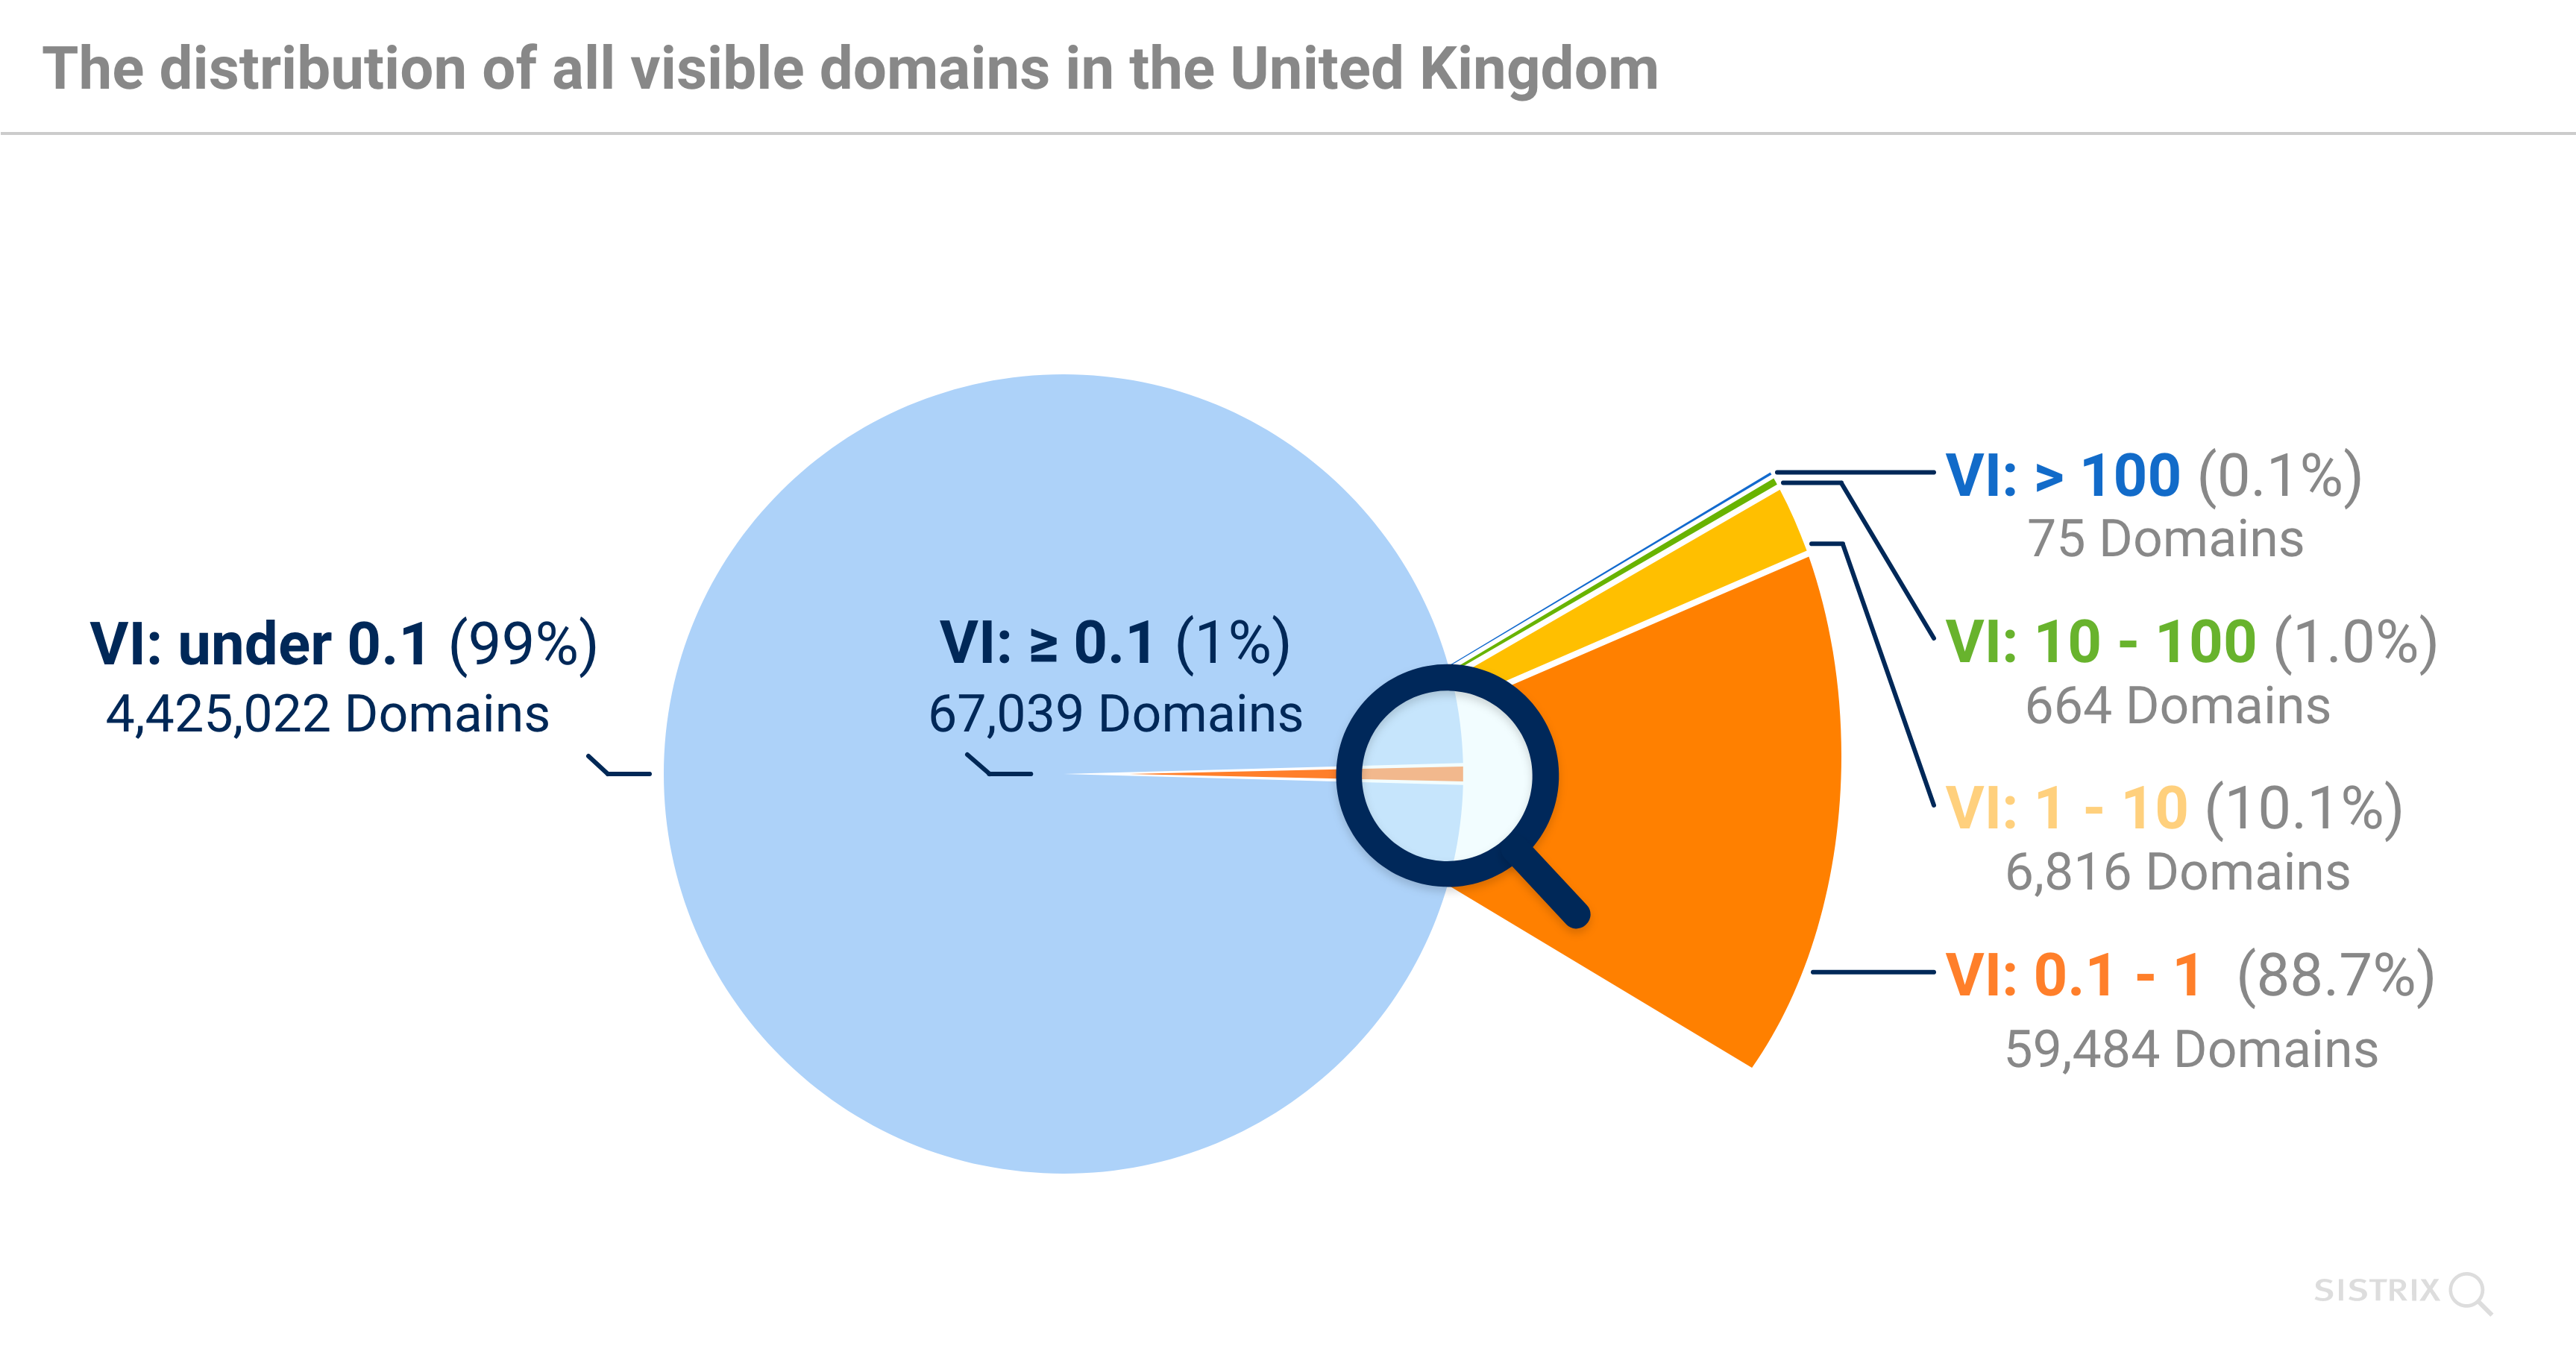 Of 4.5 million domains assessed, 99% have a VI of under 0.1